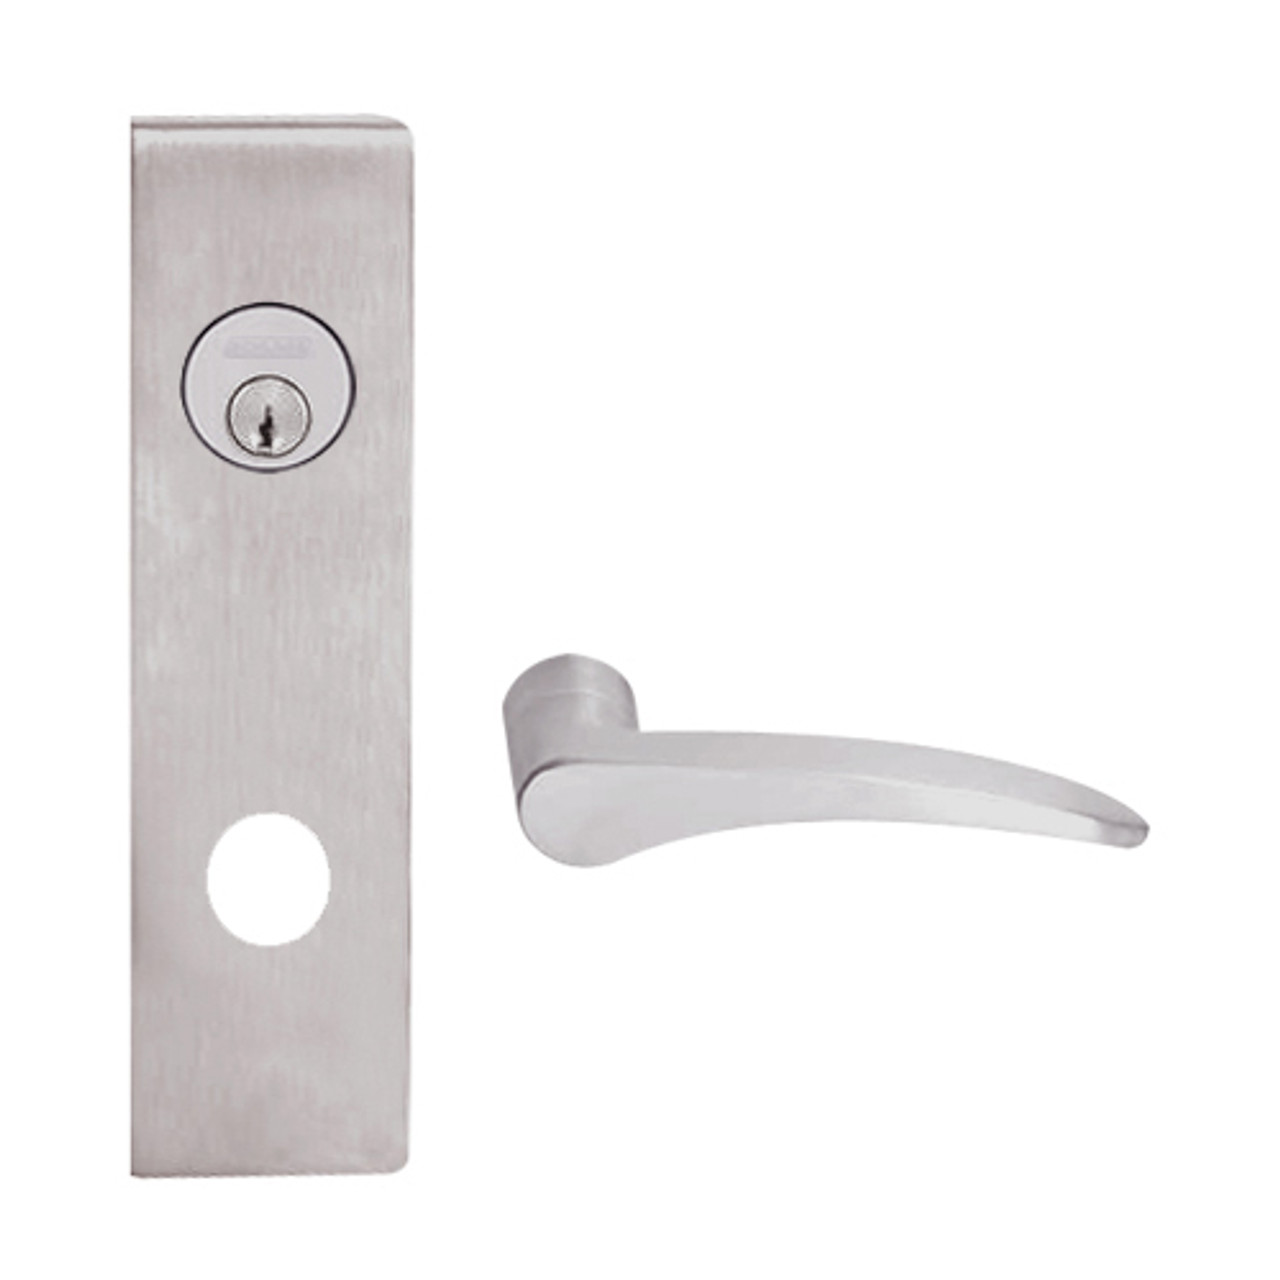 L9026L-12N-630-LH Schlage L Series Less Cylinder Exit Lock with Cylinder Commercial Mortise Lock with 12 Cast Lever Design in Satin Stainless Steel